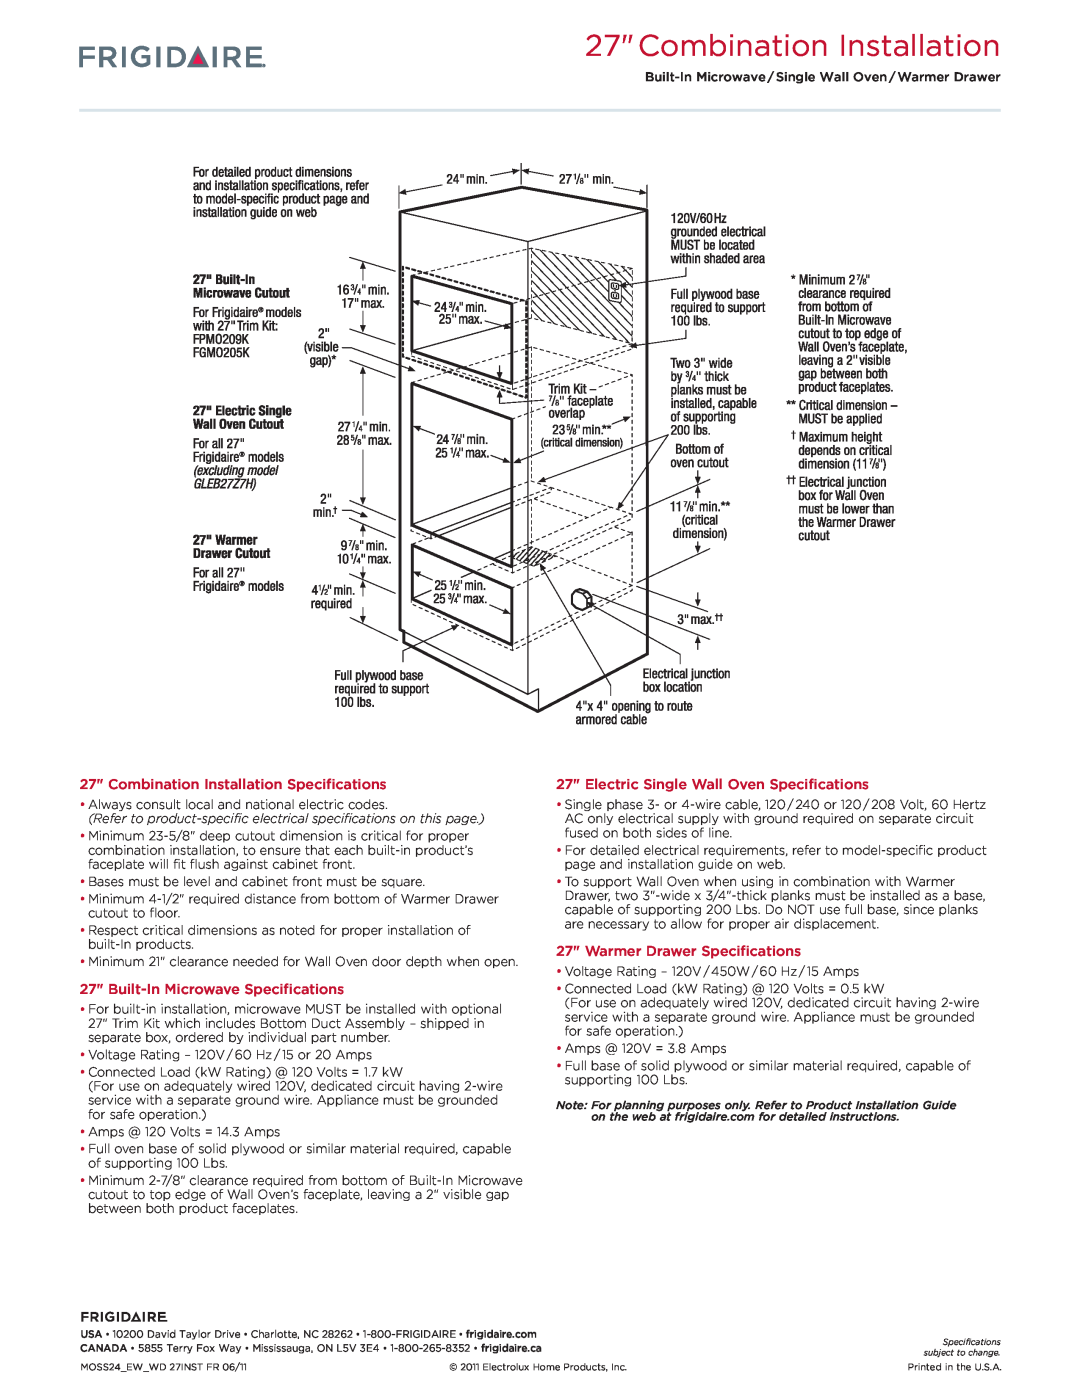 Frigidaire FGMO205K manual Warmer Drawer Specifications, Combination Installation Specifications 